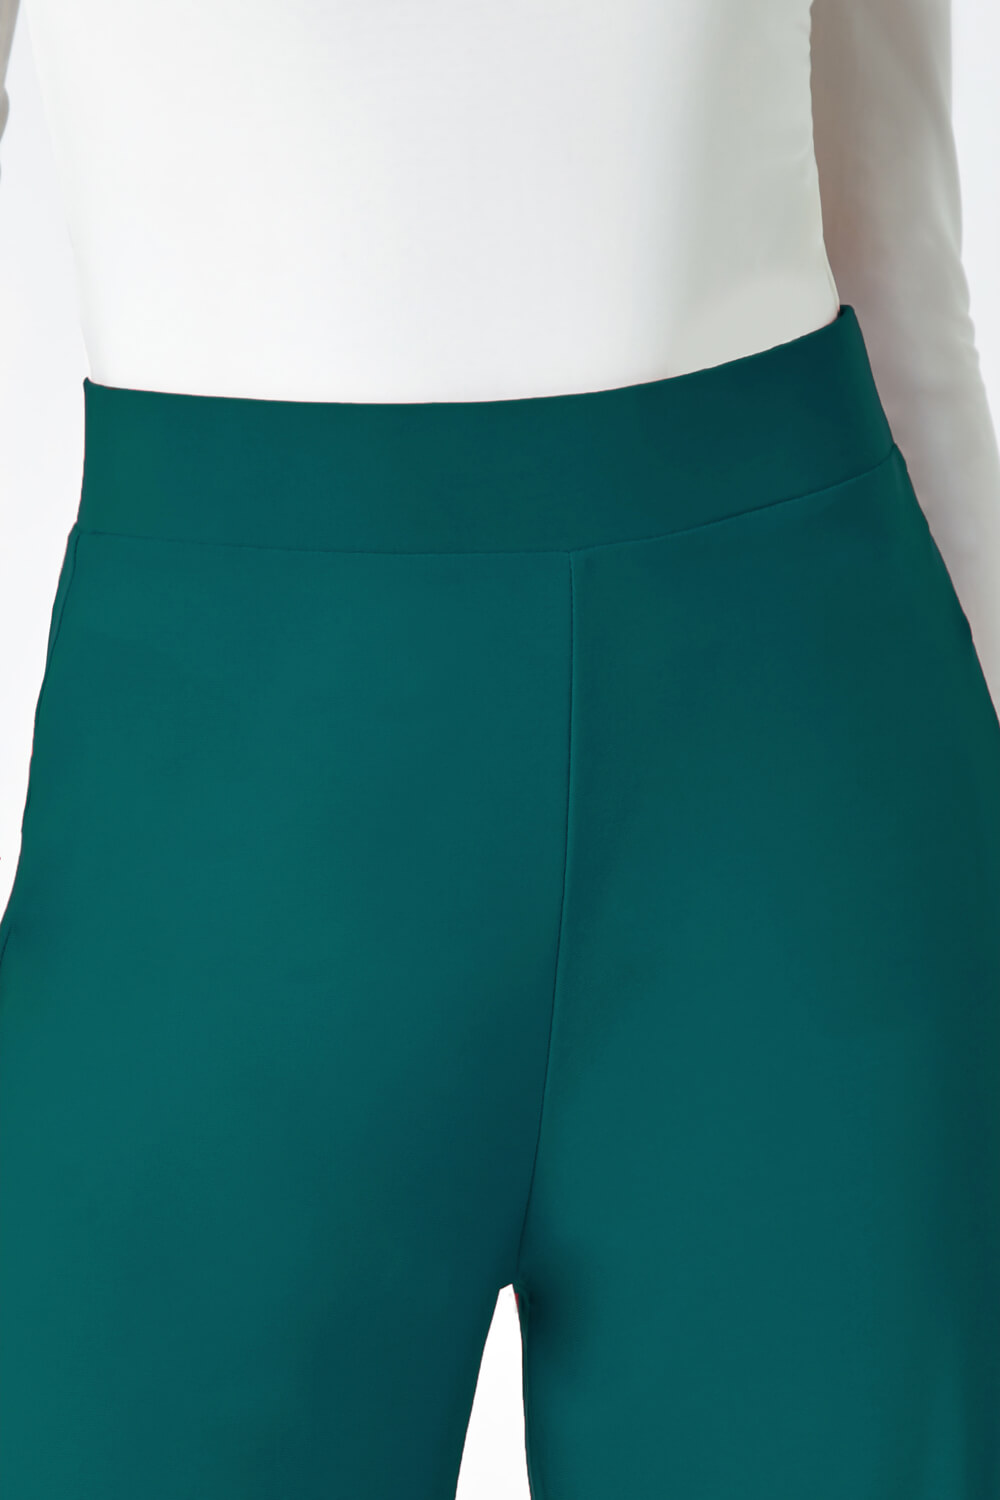 Teal Wide Leg Stretch Trousers, Image 5 of 5